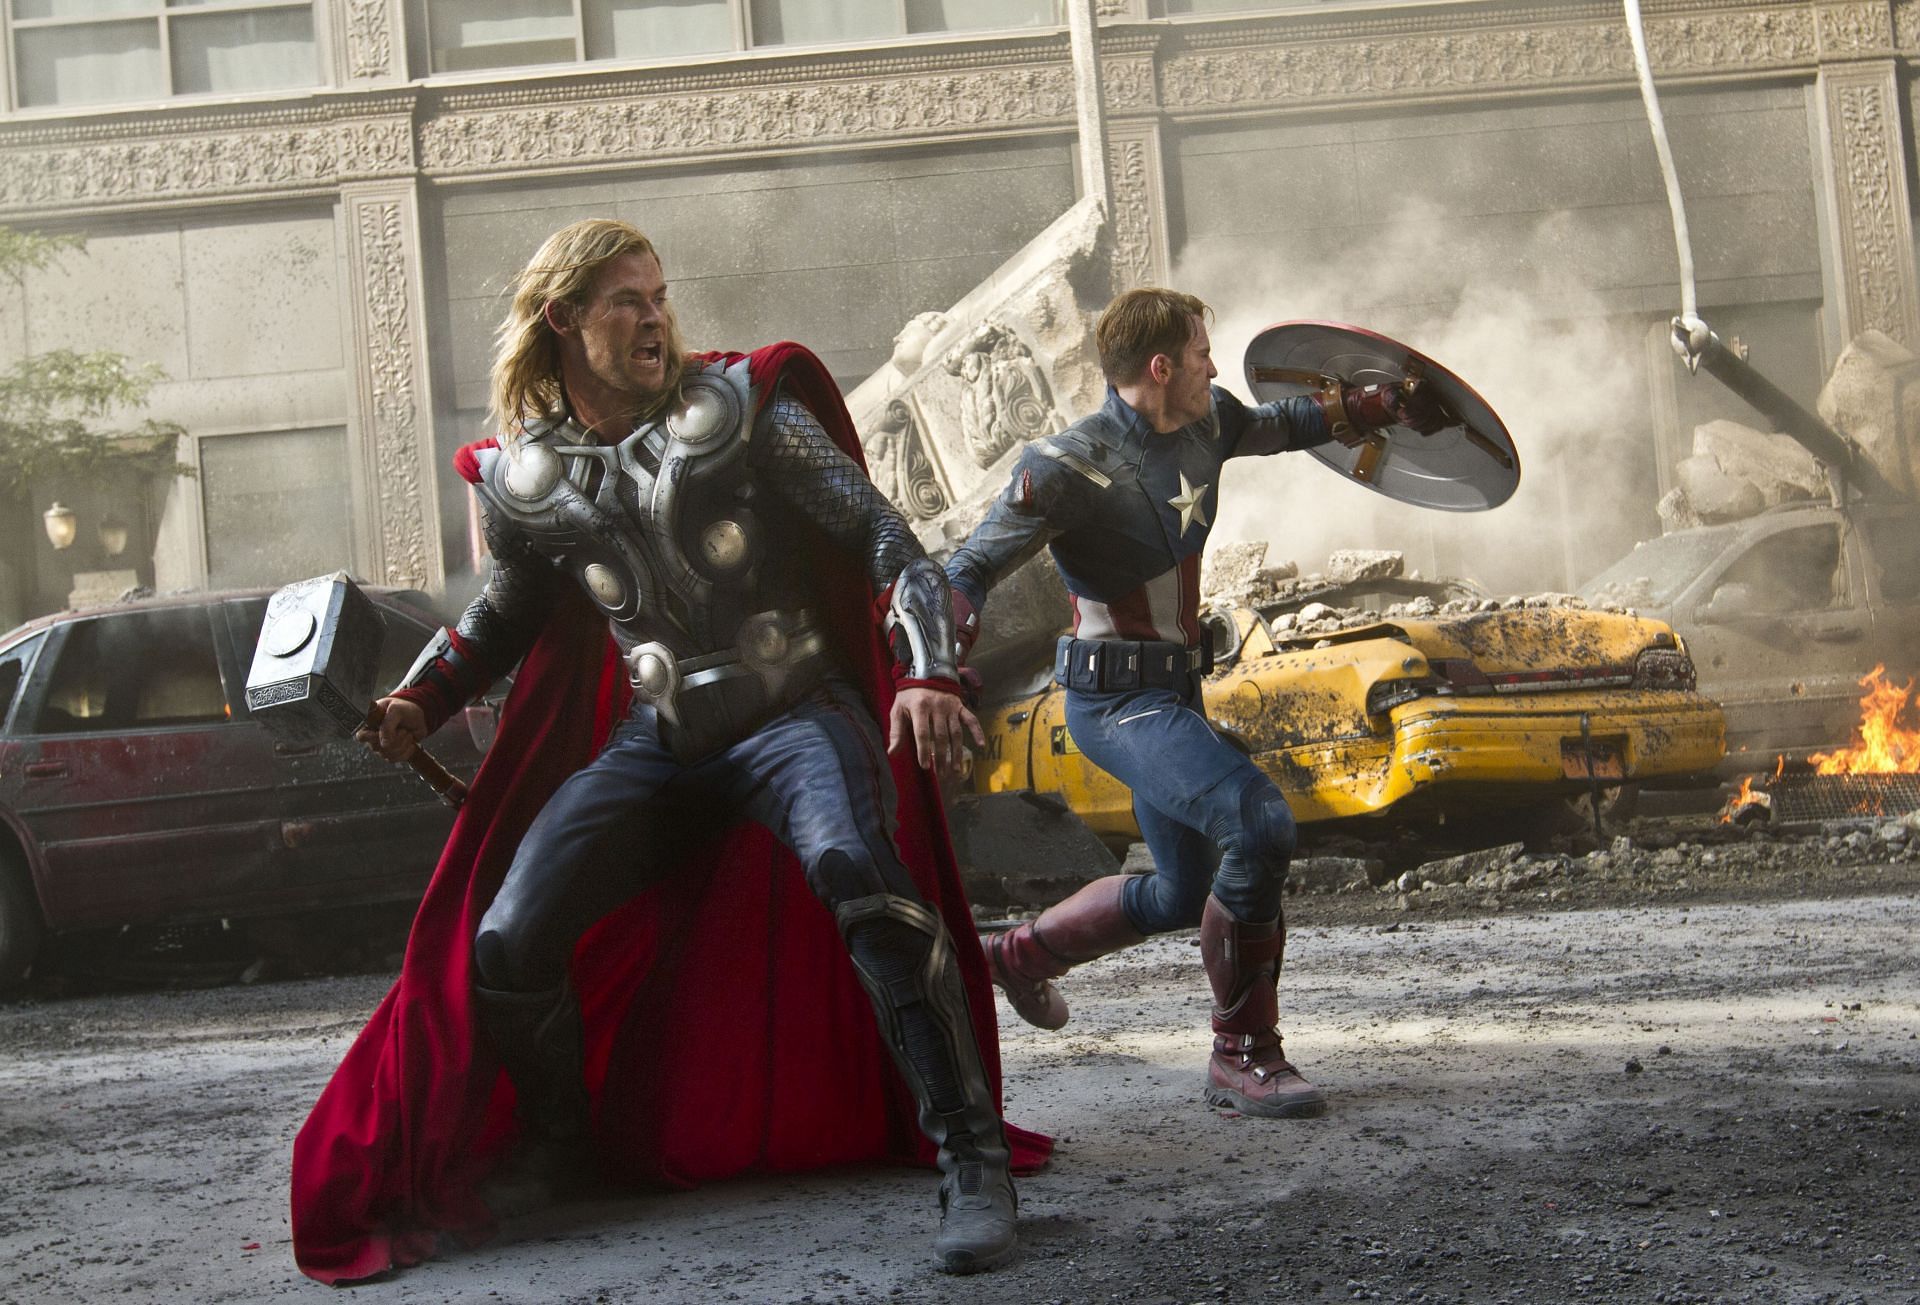 A still from The Avengers (Image via Marvel)